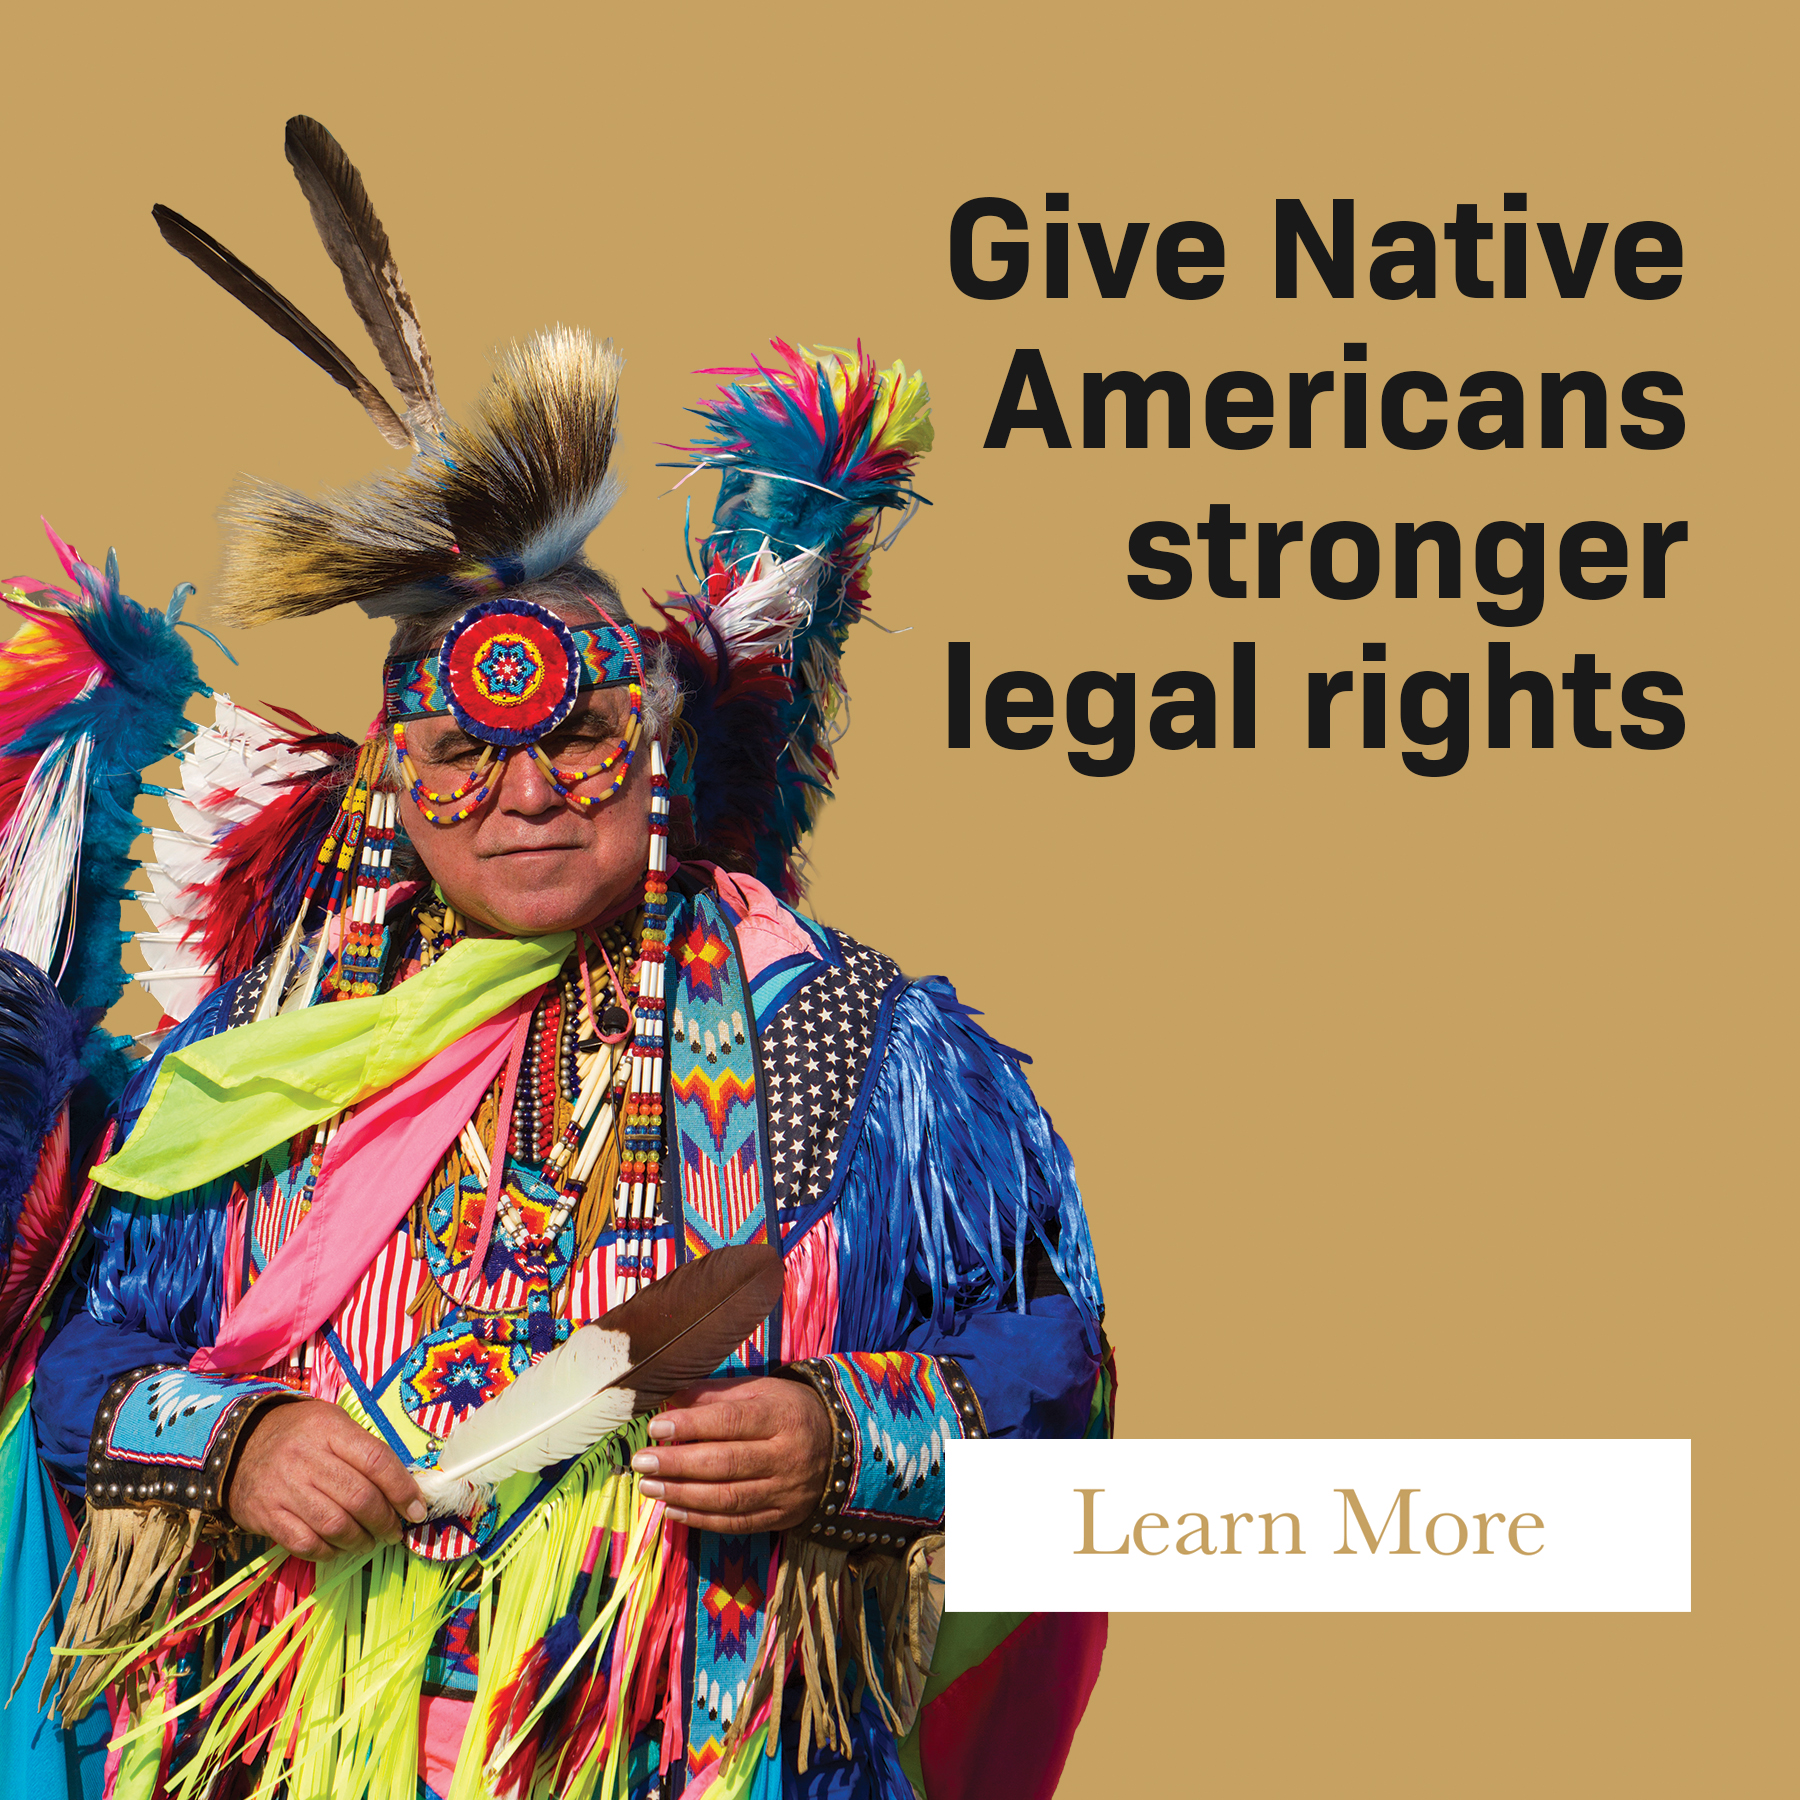 Give Native Americans stronger legal rights